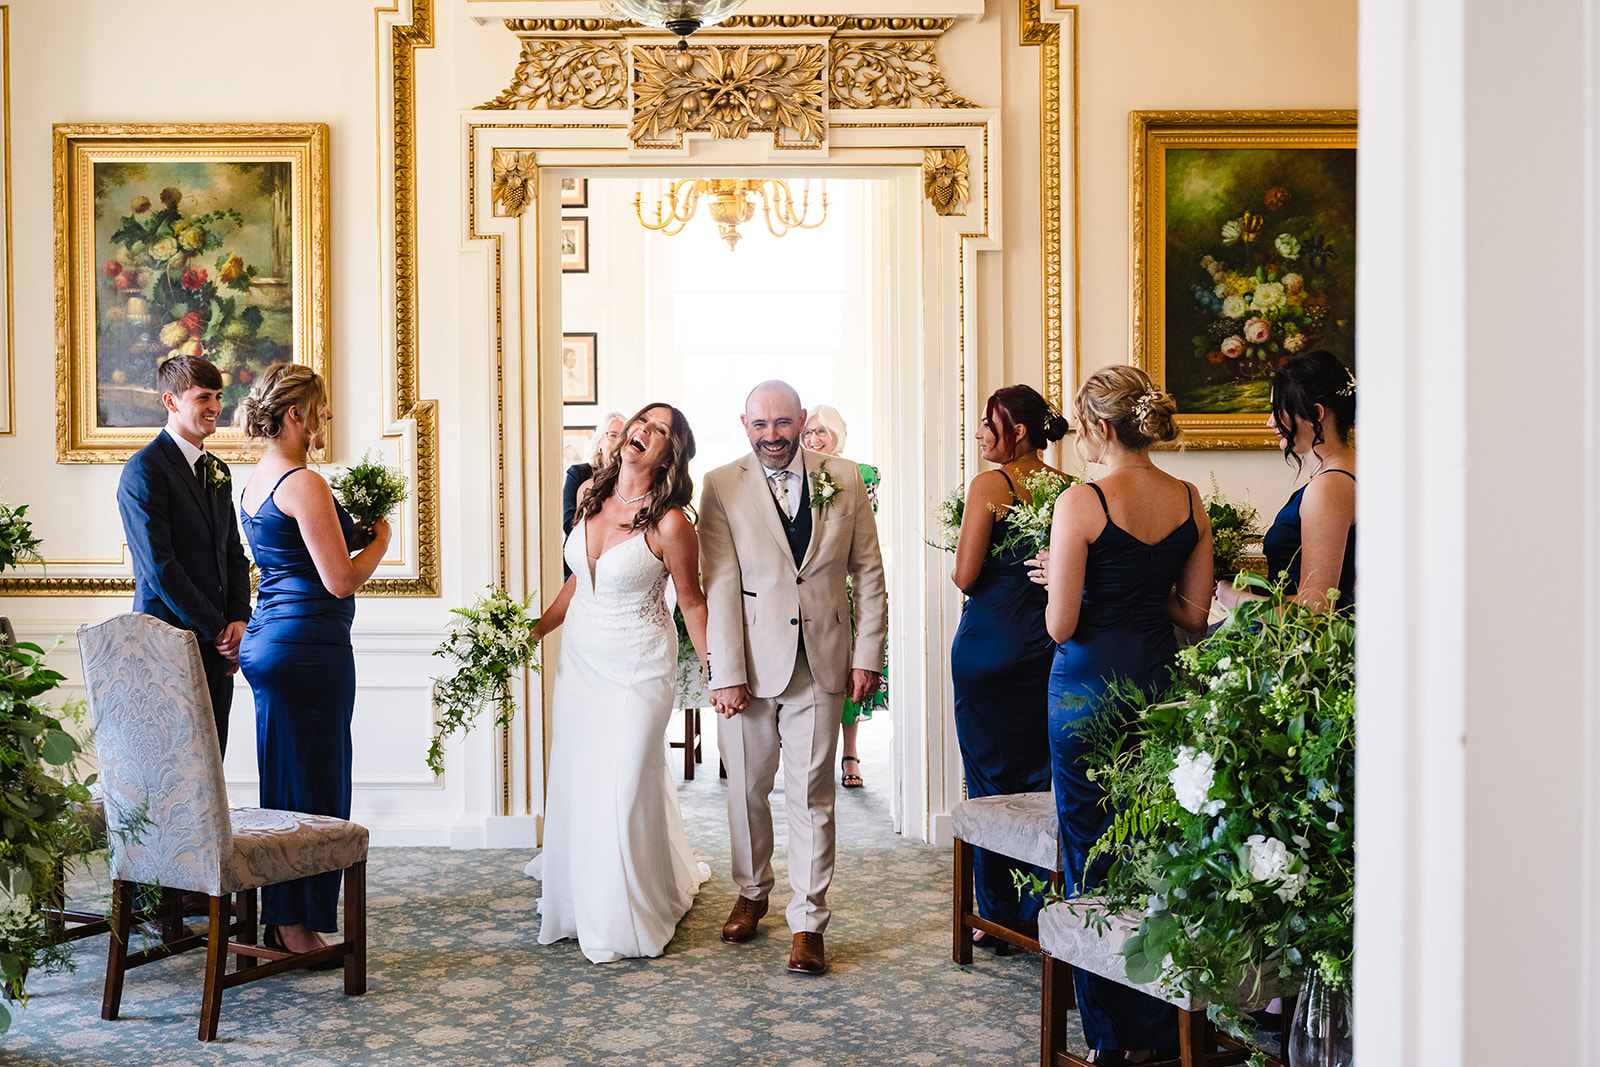 Bride and groom walking down the aisle during their intimate wedding ceremony at Stapleford Park Hotel by Amanda Forman 